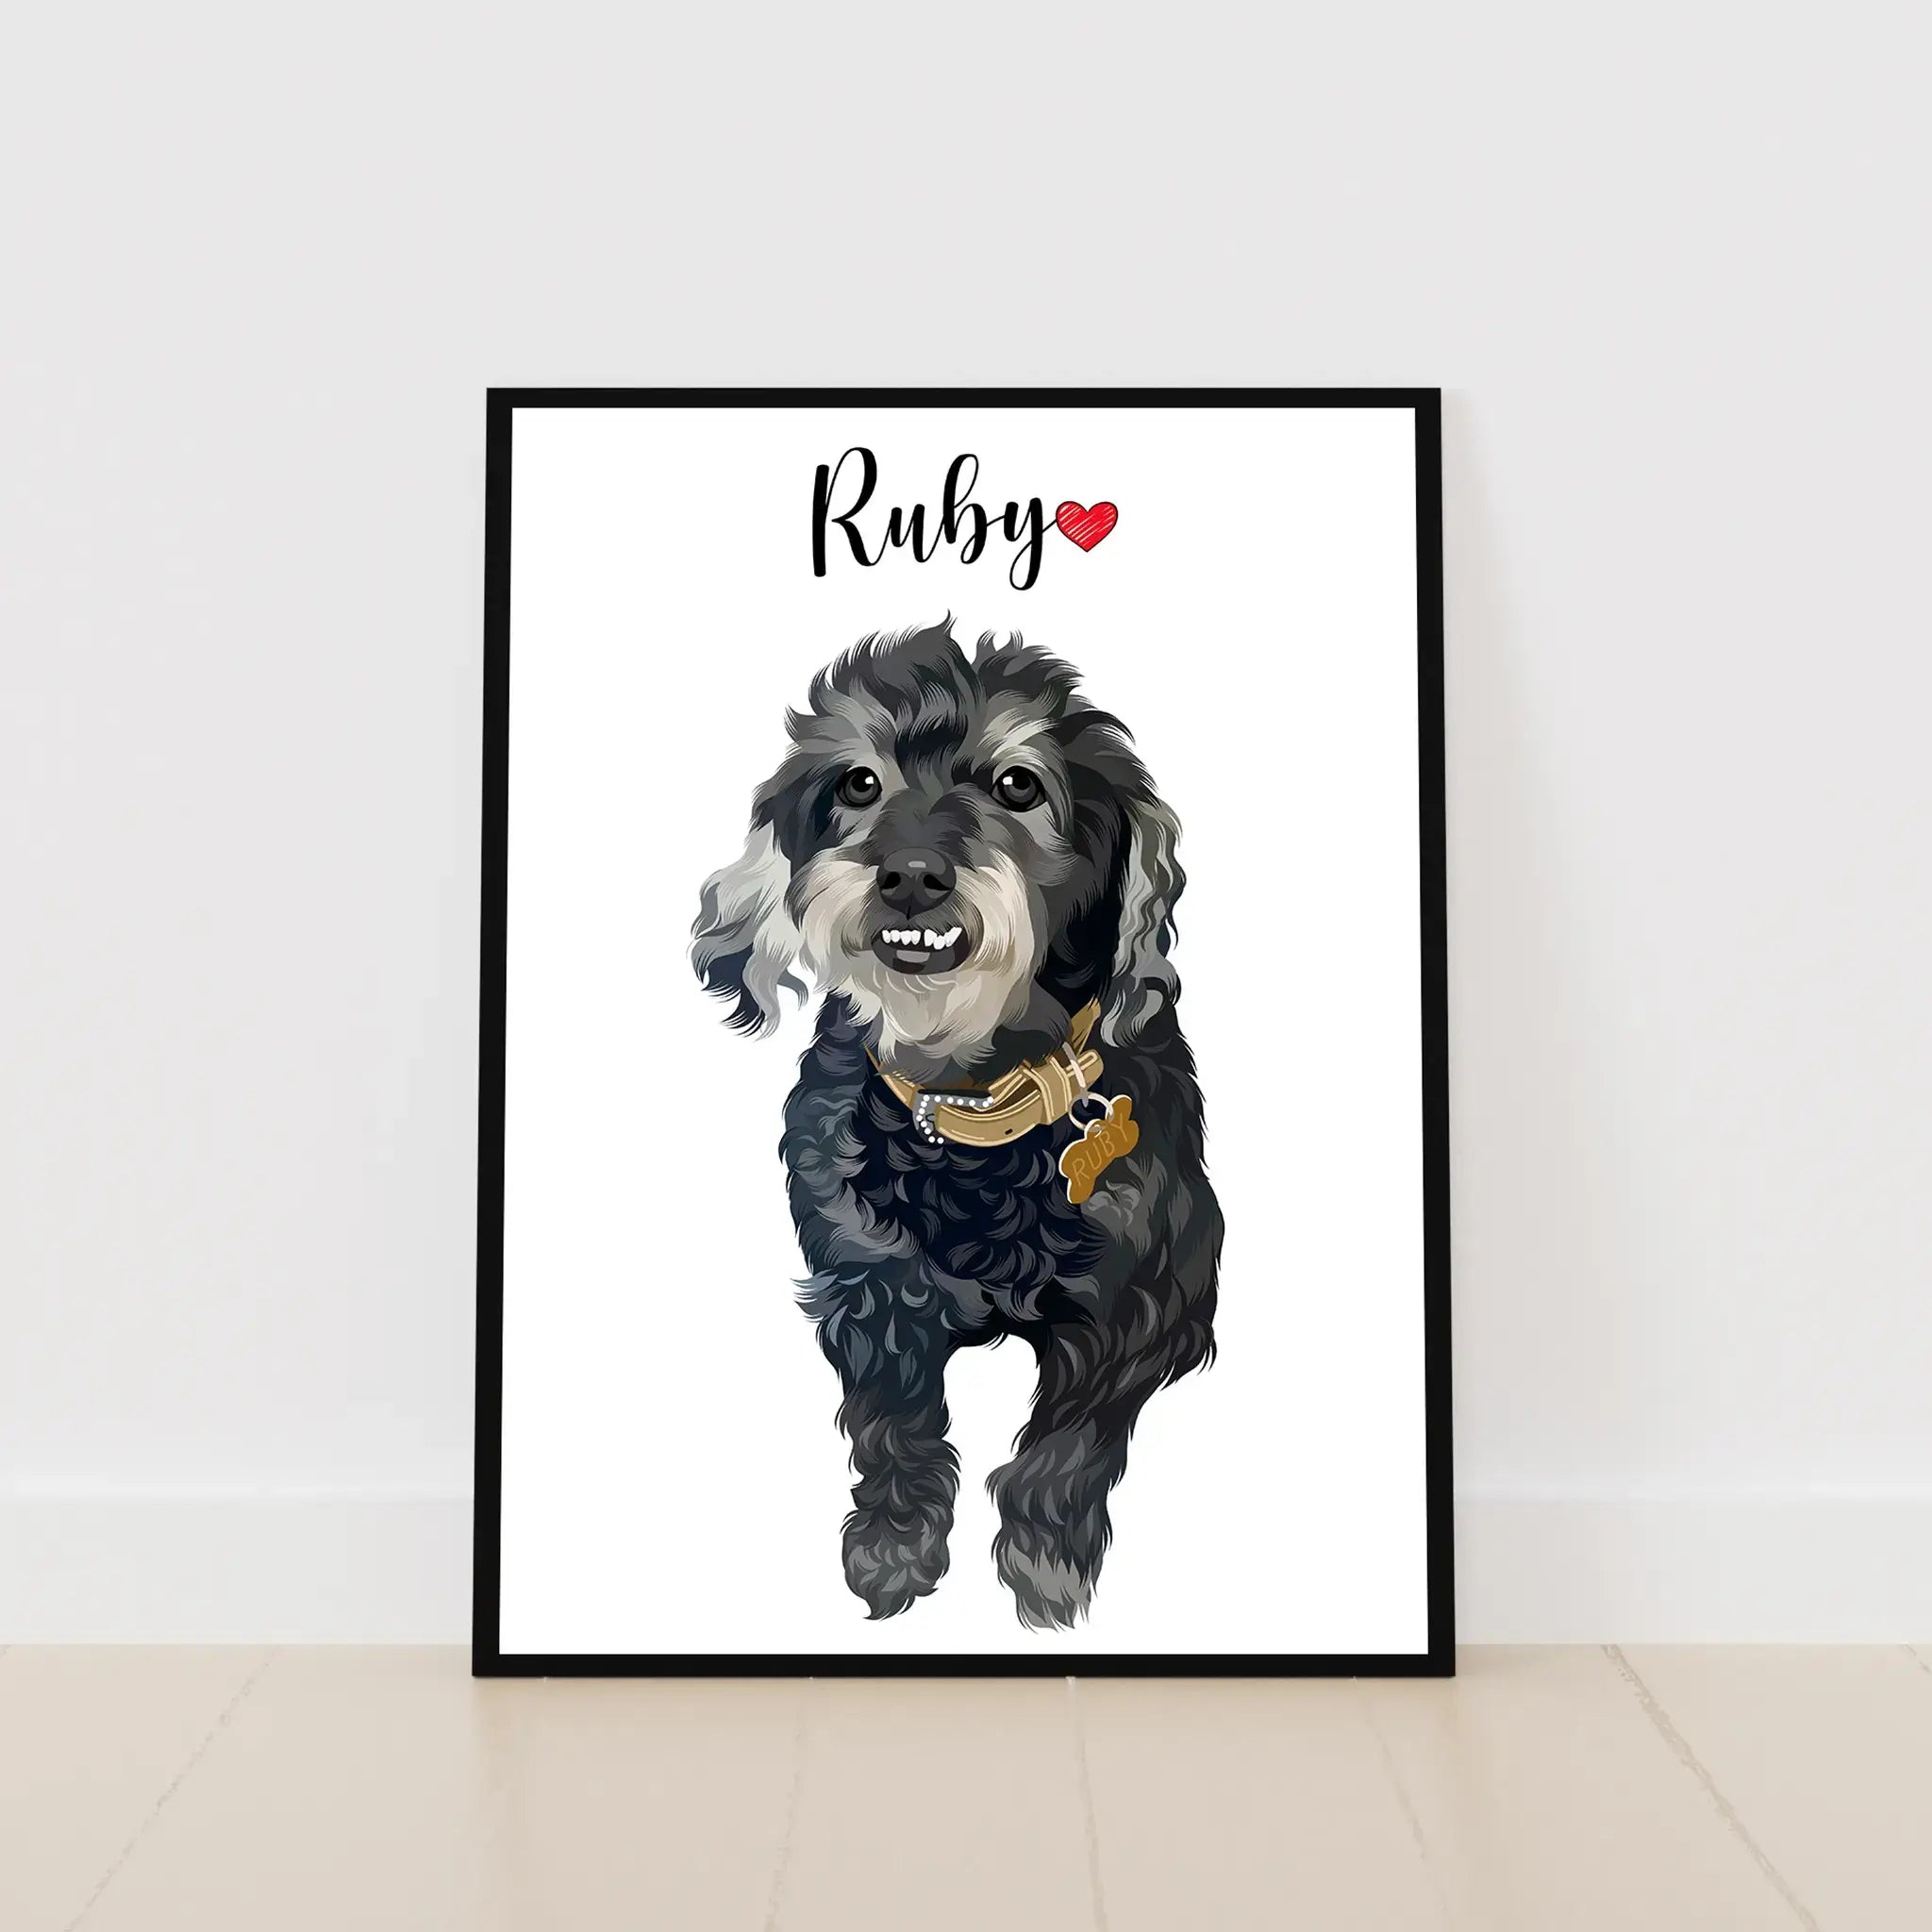 Custom pet portrait from your photo for pet lovers.